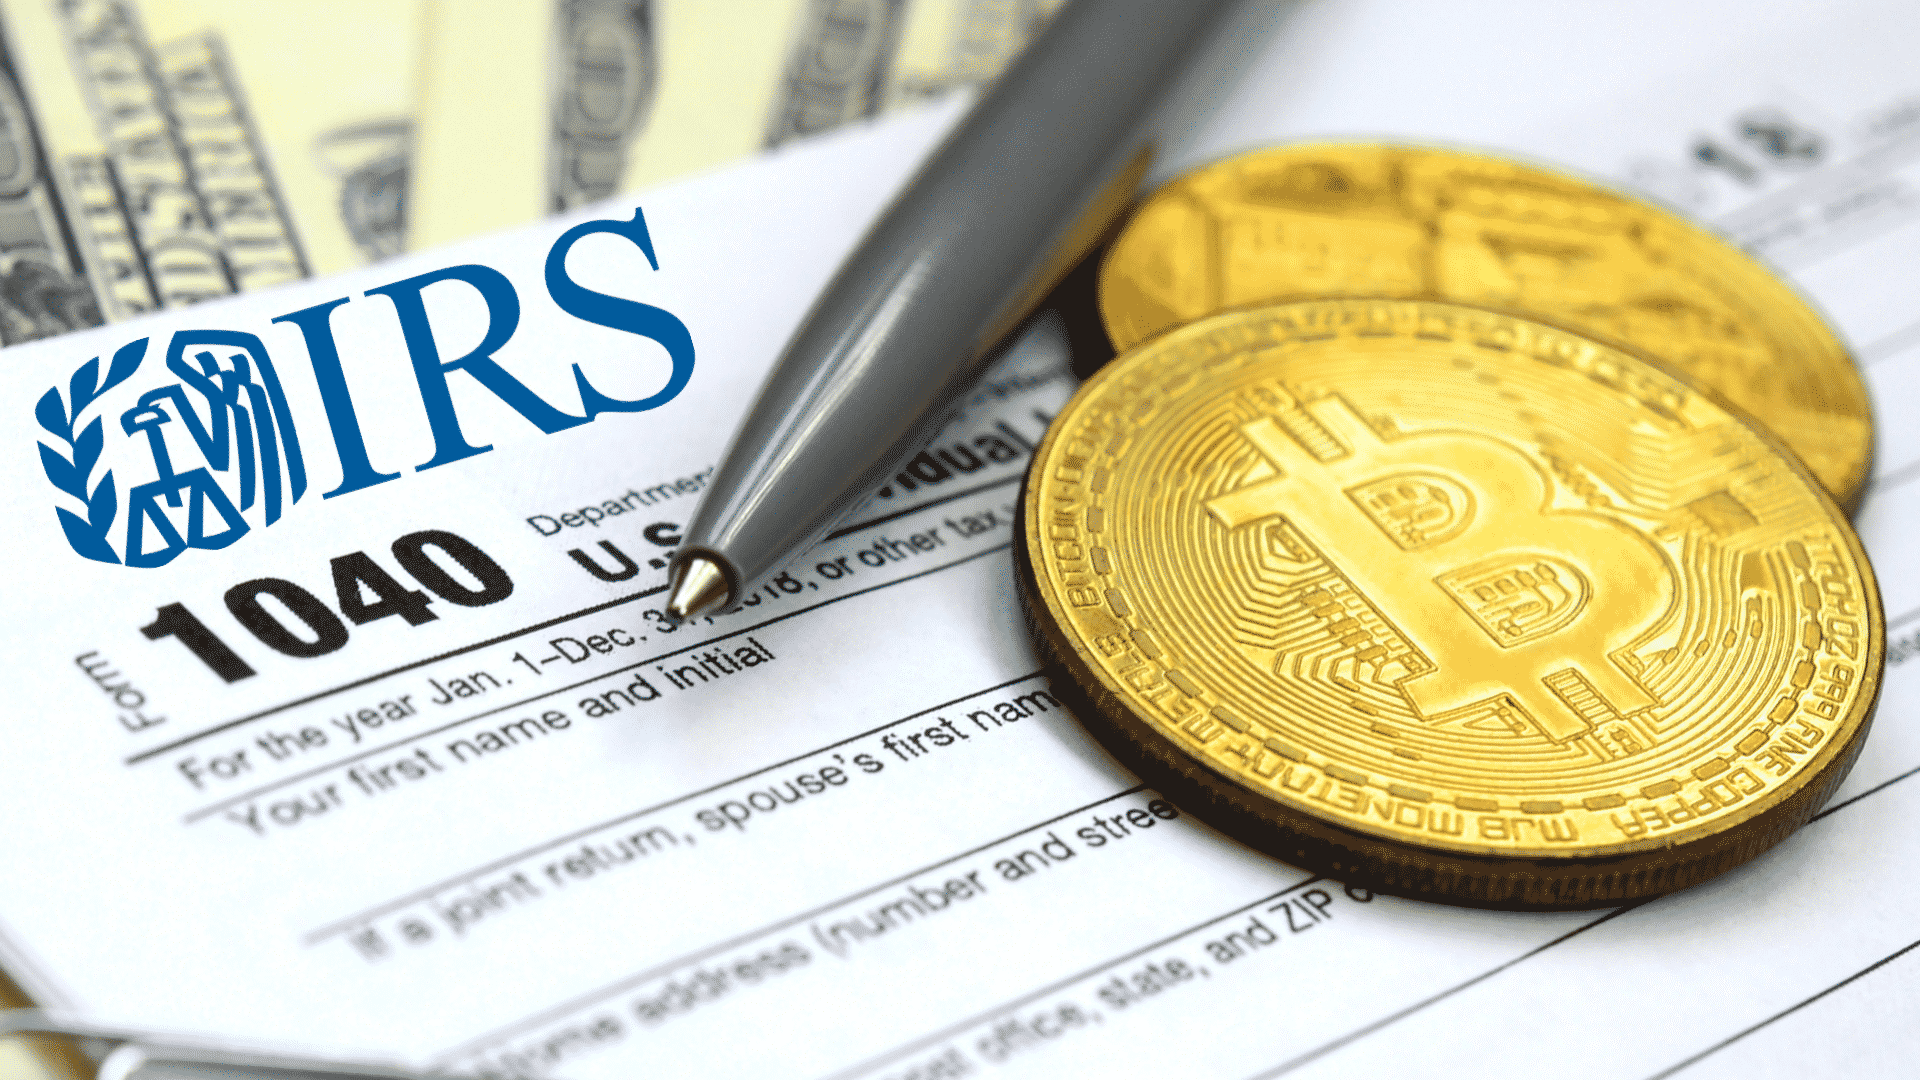 even buying crypto currency need to report irs